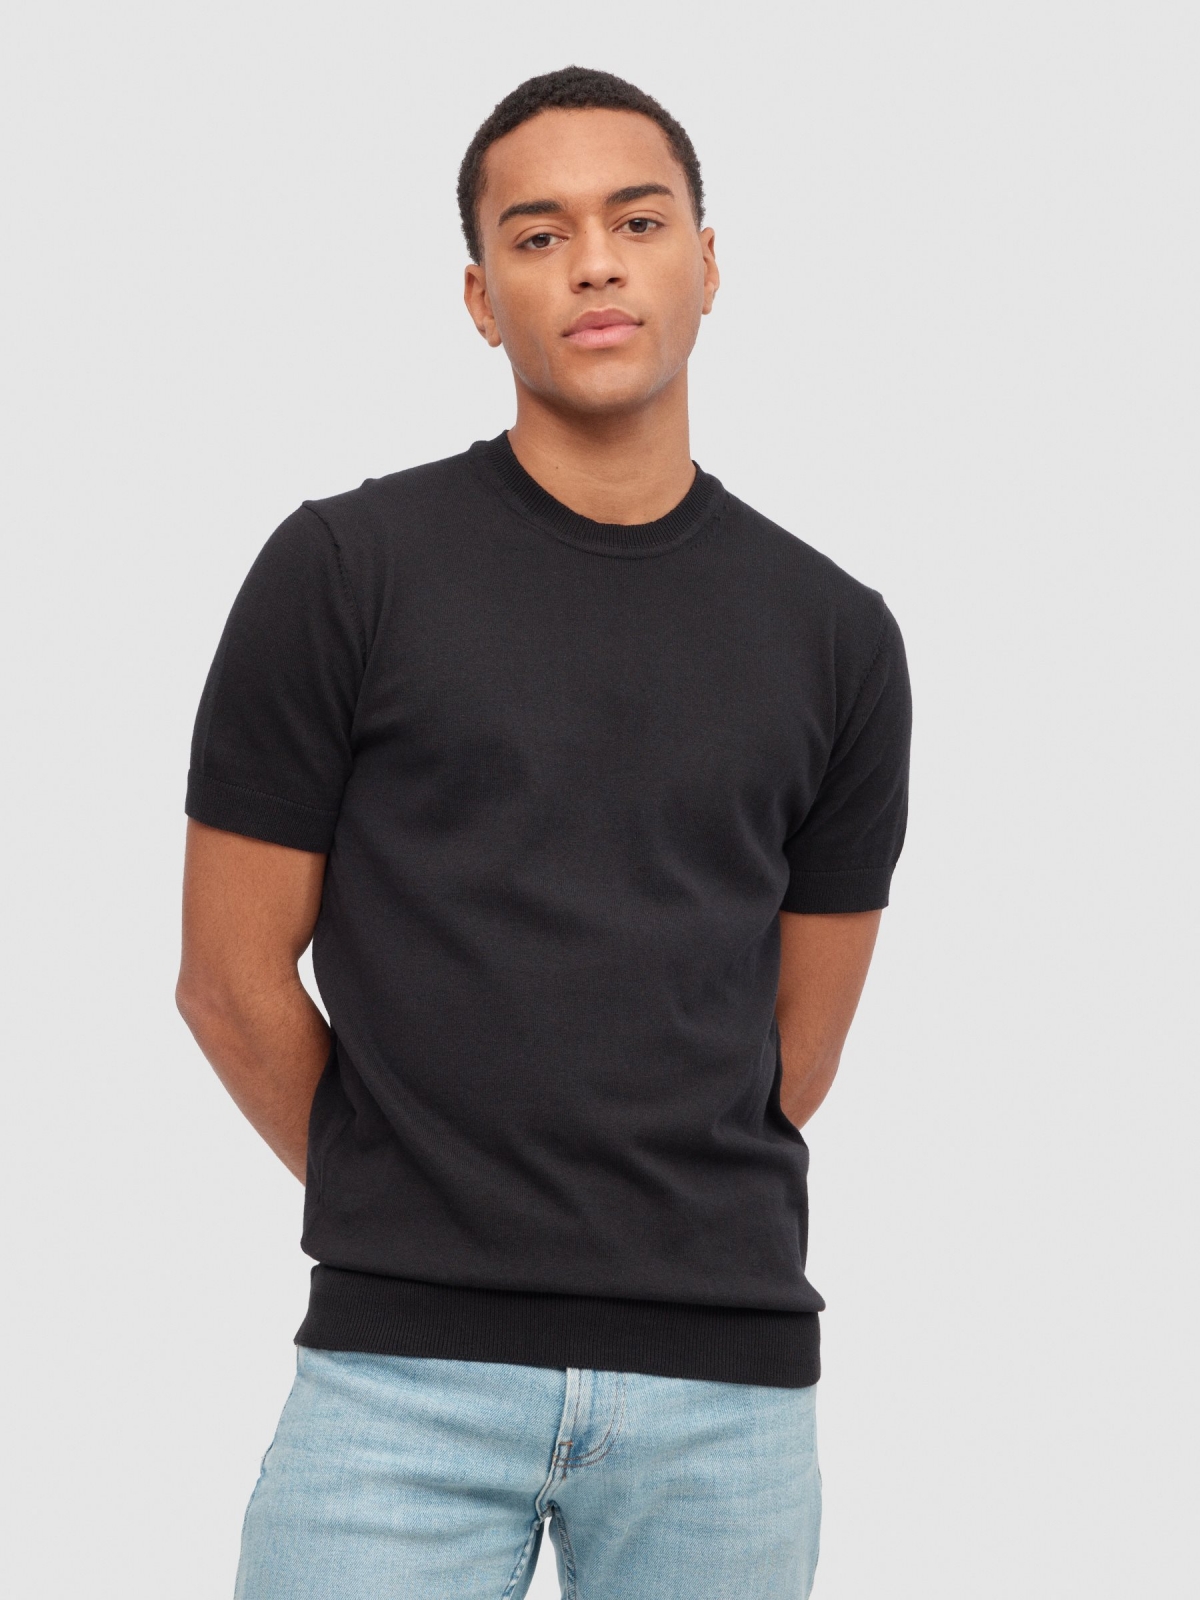 Basic knitted T-shirt black middle front view